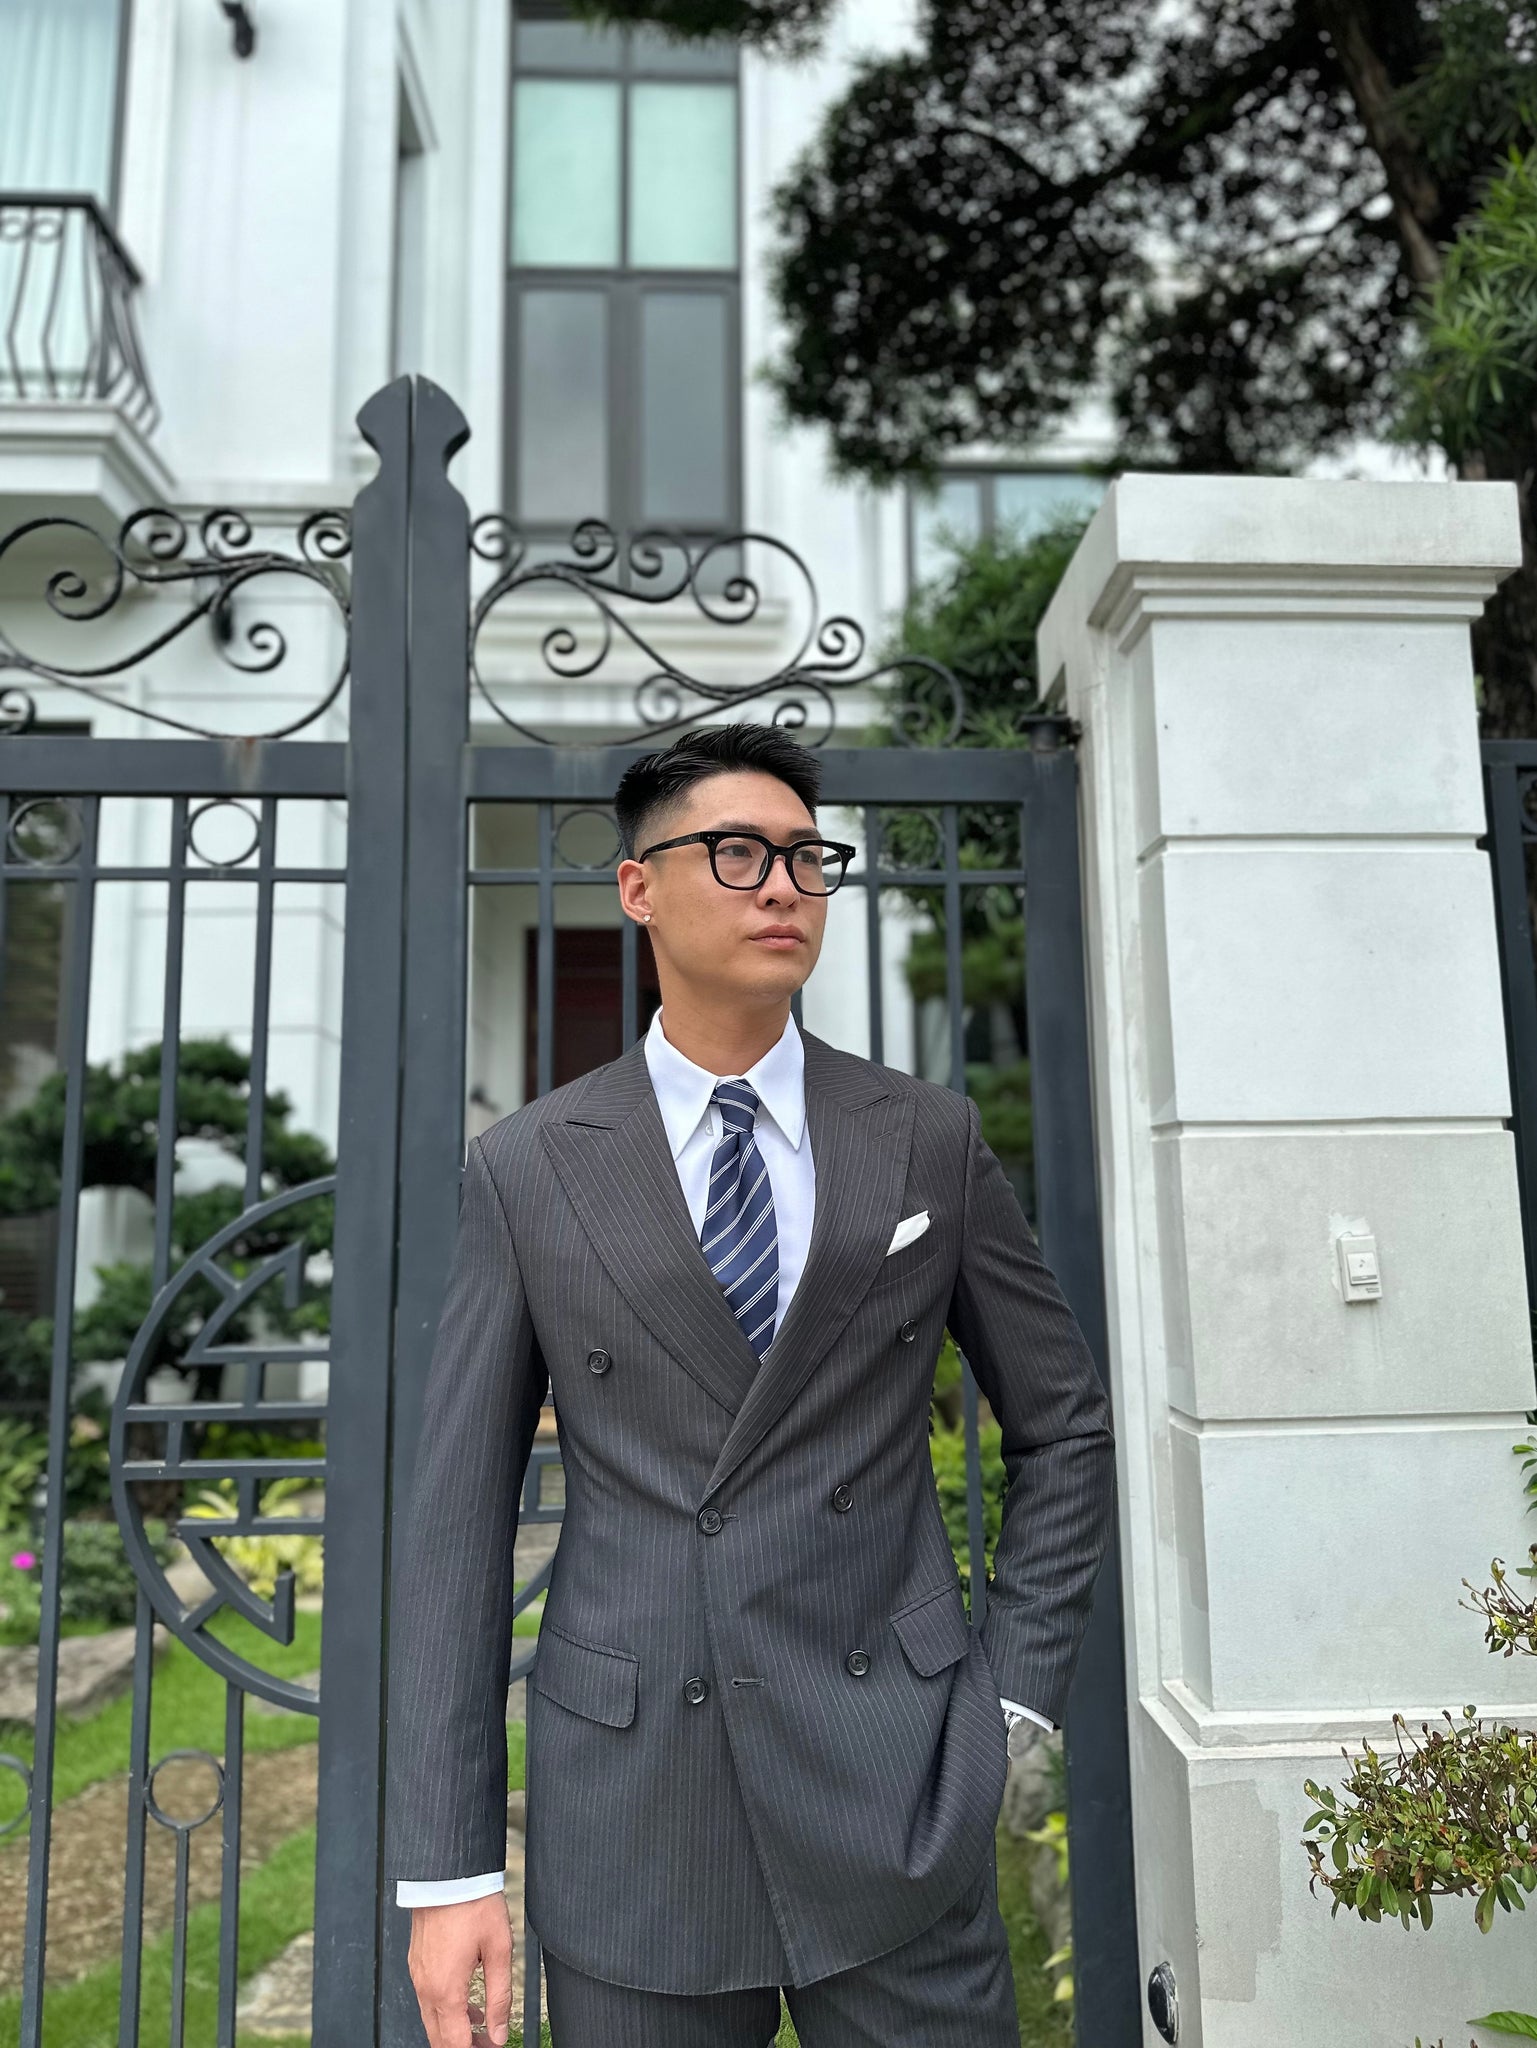 Kingsman Double-Breasted Suit + White Shirt